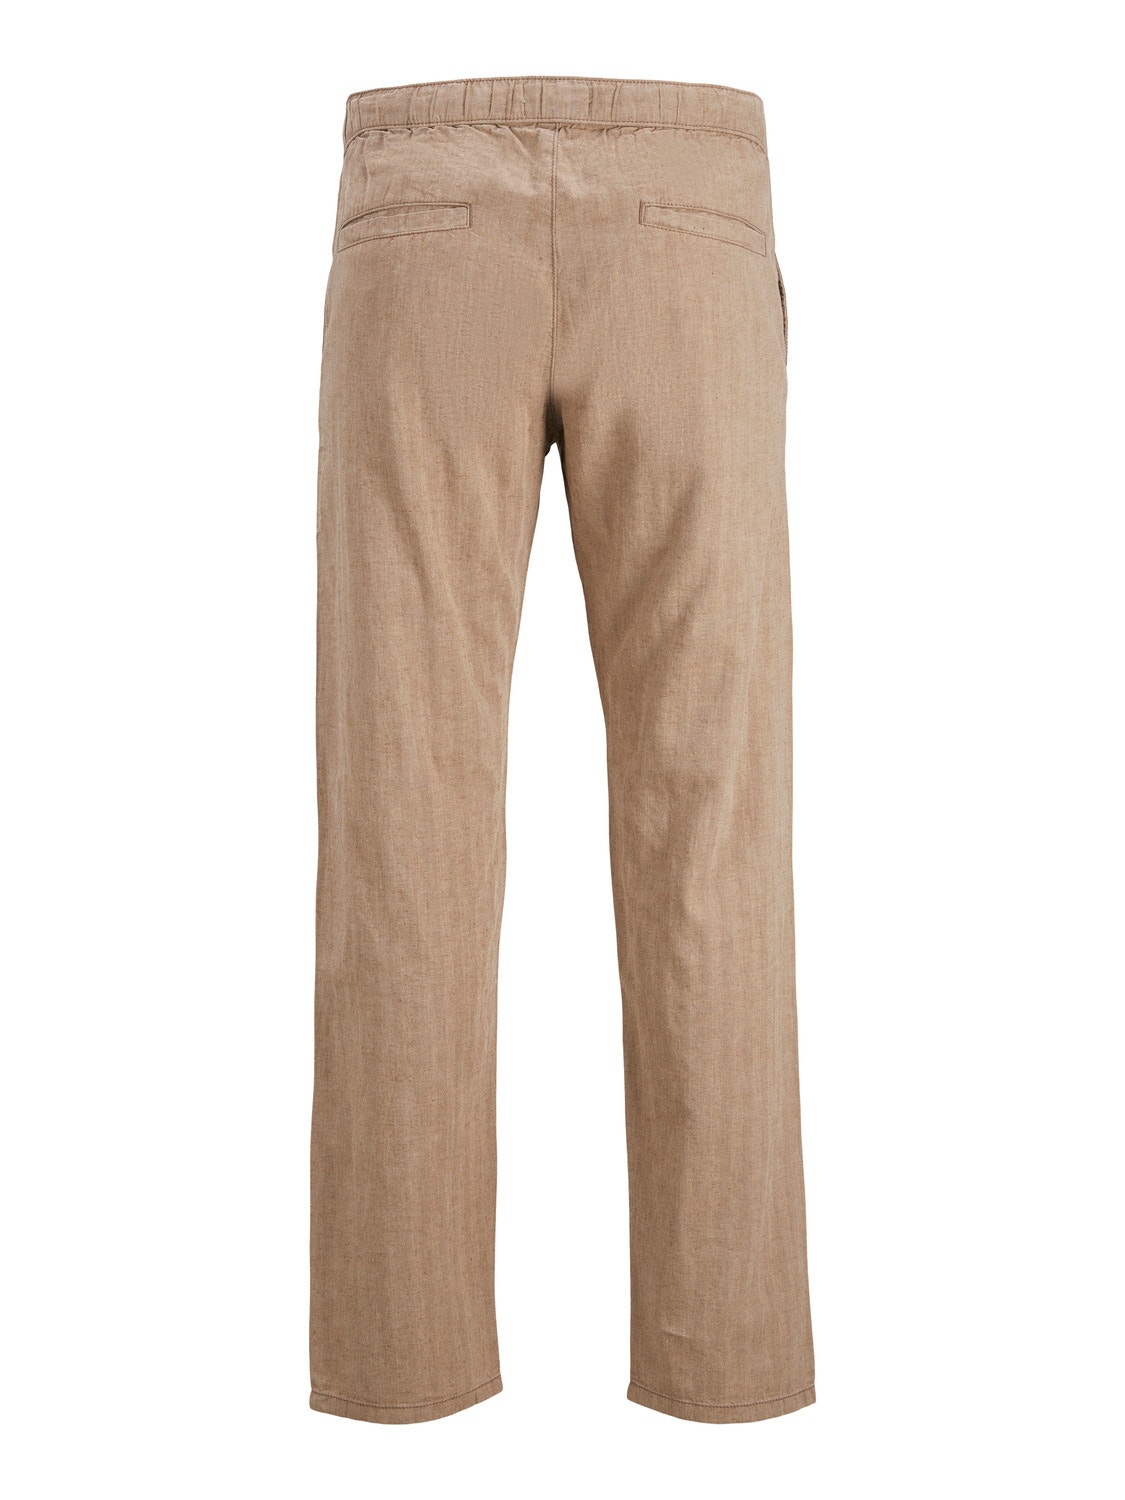 Jack & Jones Calças Chino Relaxed Fit -Falcon - 12234593